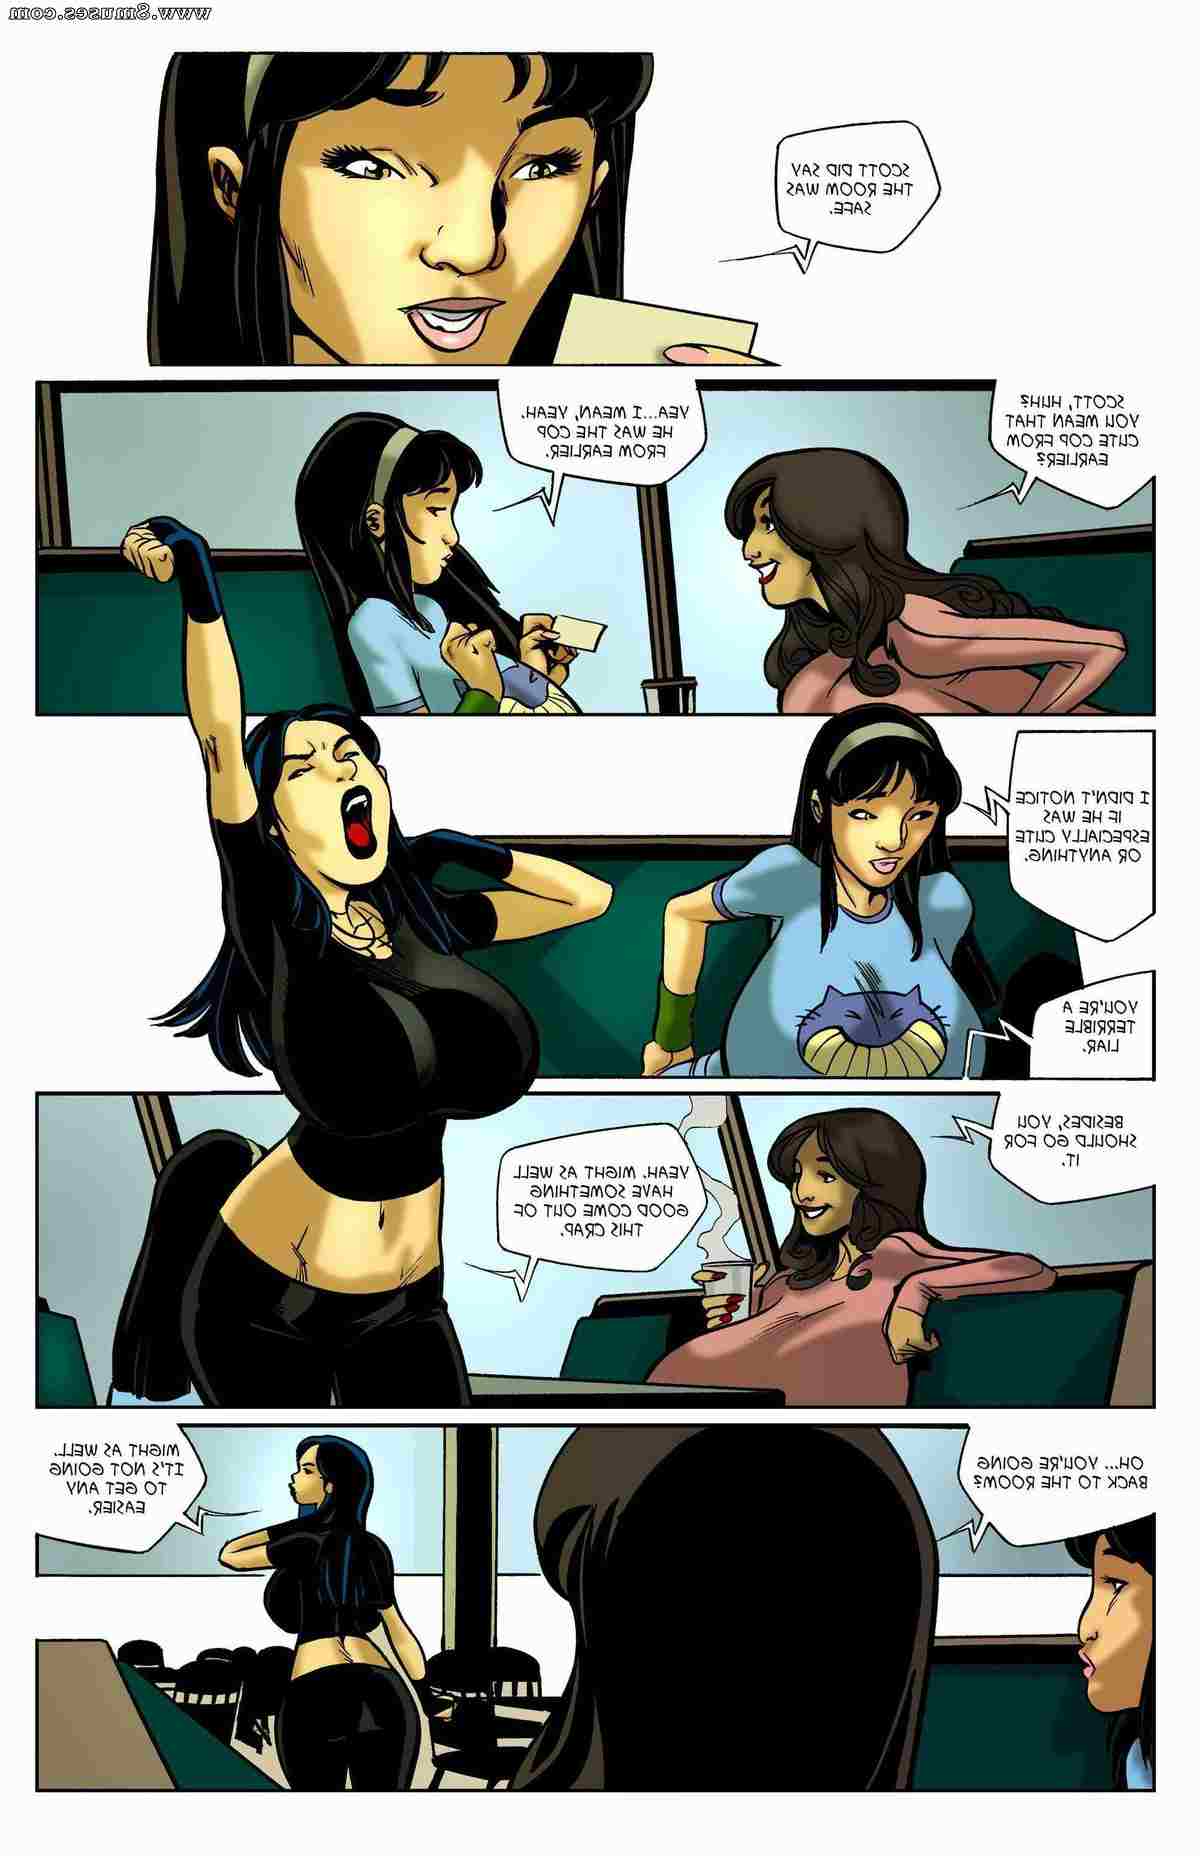 BE-Story-Club-Comics/Welcome-to-Chastity Welcome_to_Chastity__8muses_-_Sex_and_Porn_Comics_47.jpg